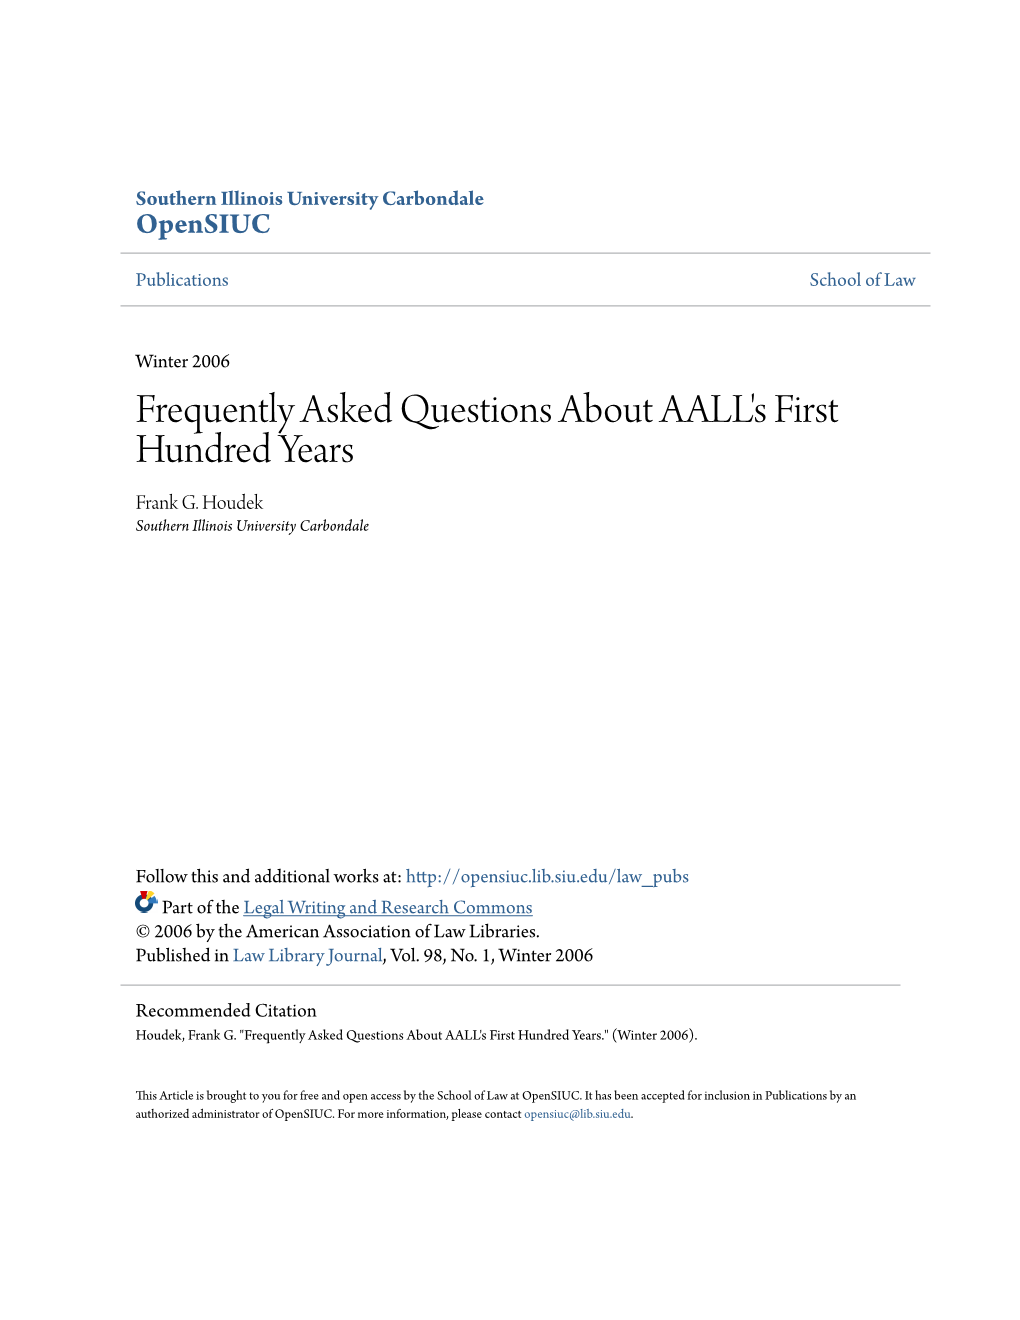 Frequently Asked Questions About AALL's First Hundred Years Frank G